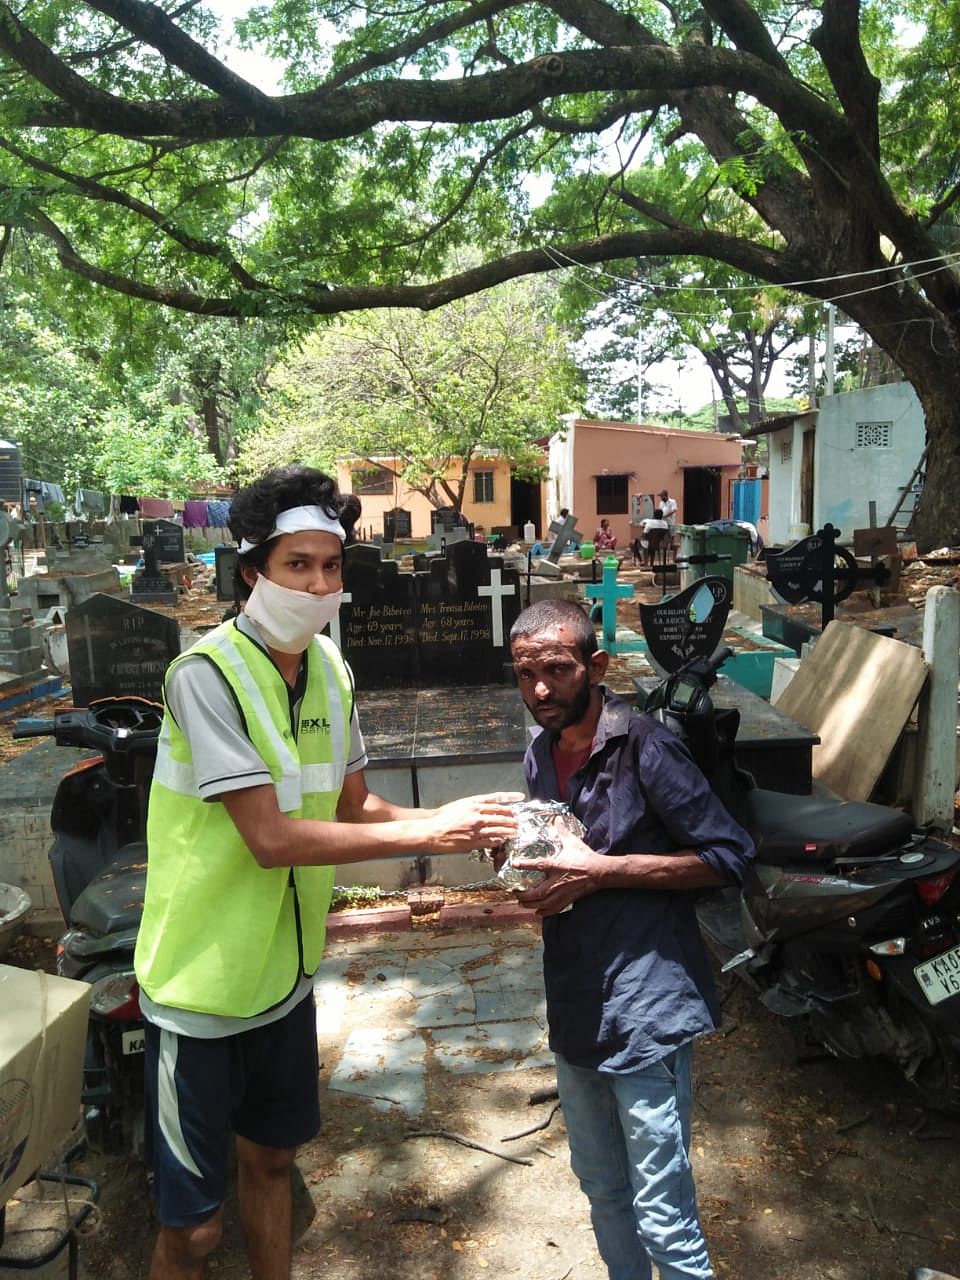 A member of the Covid Biker Relief Squad distributing food to a graveyard worker.